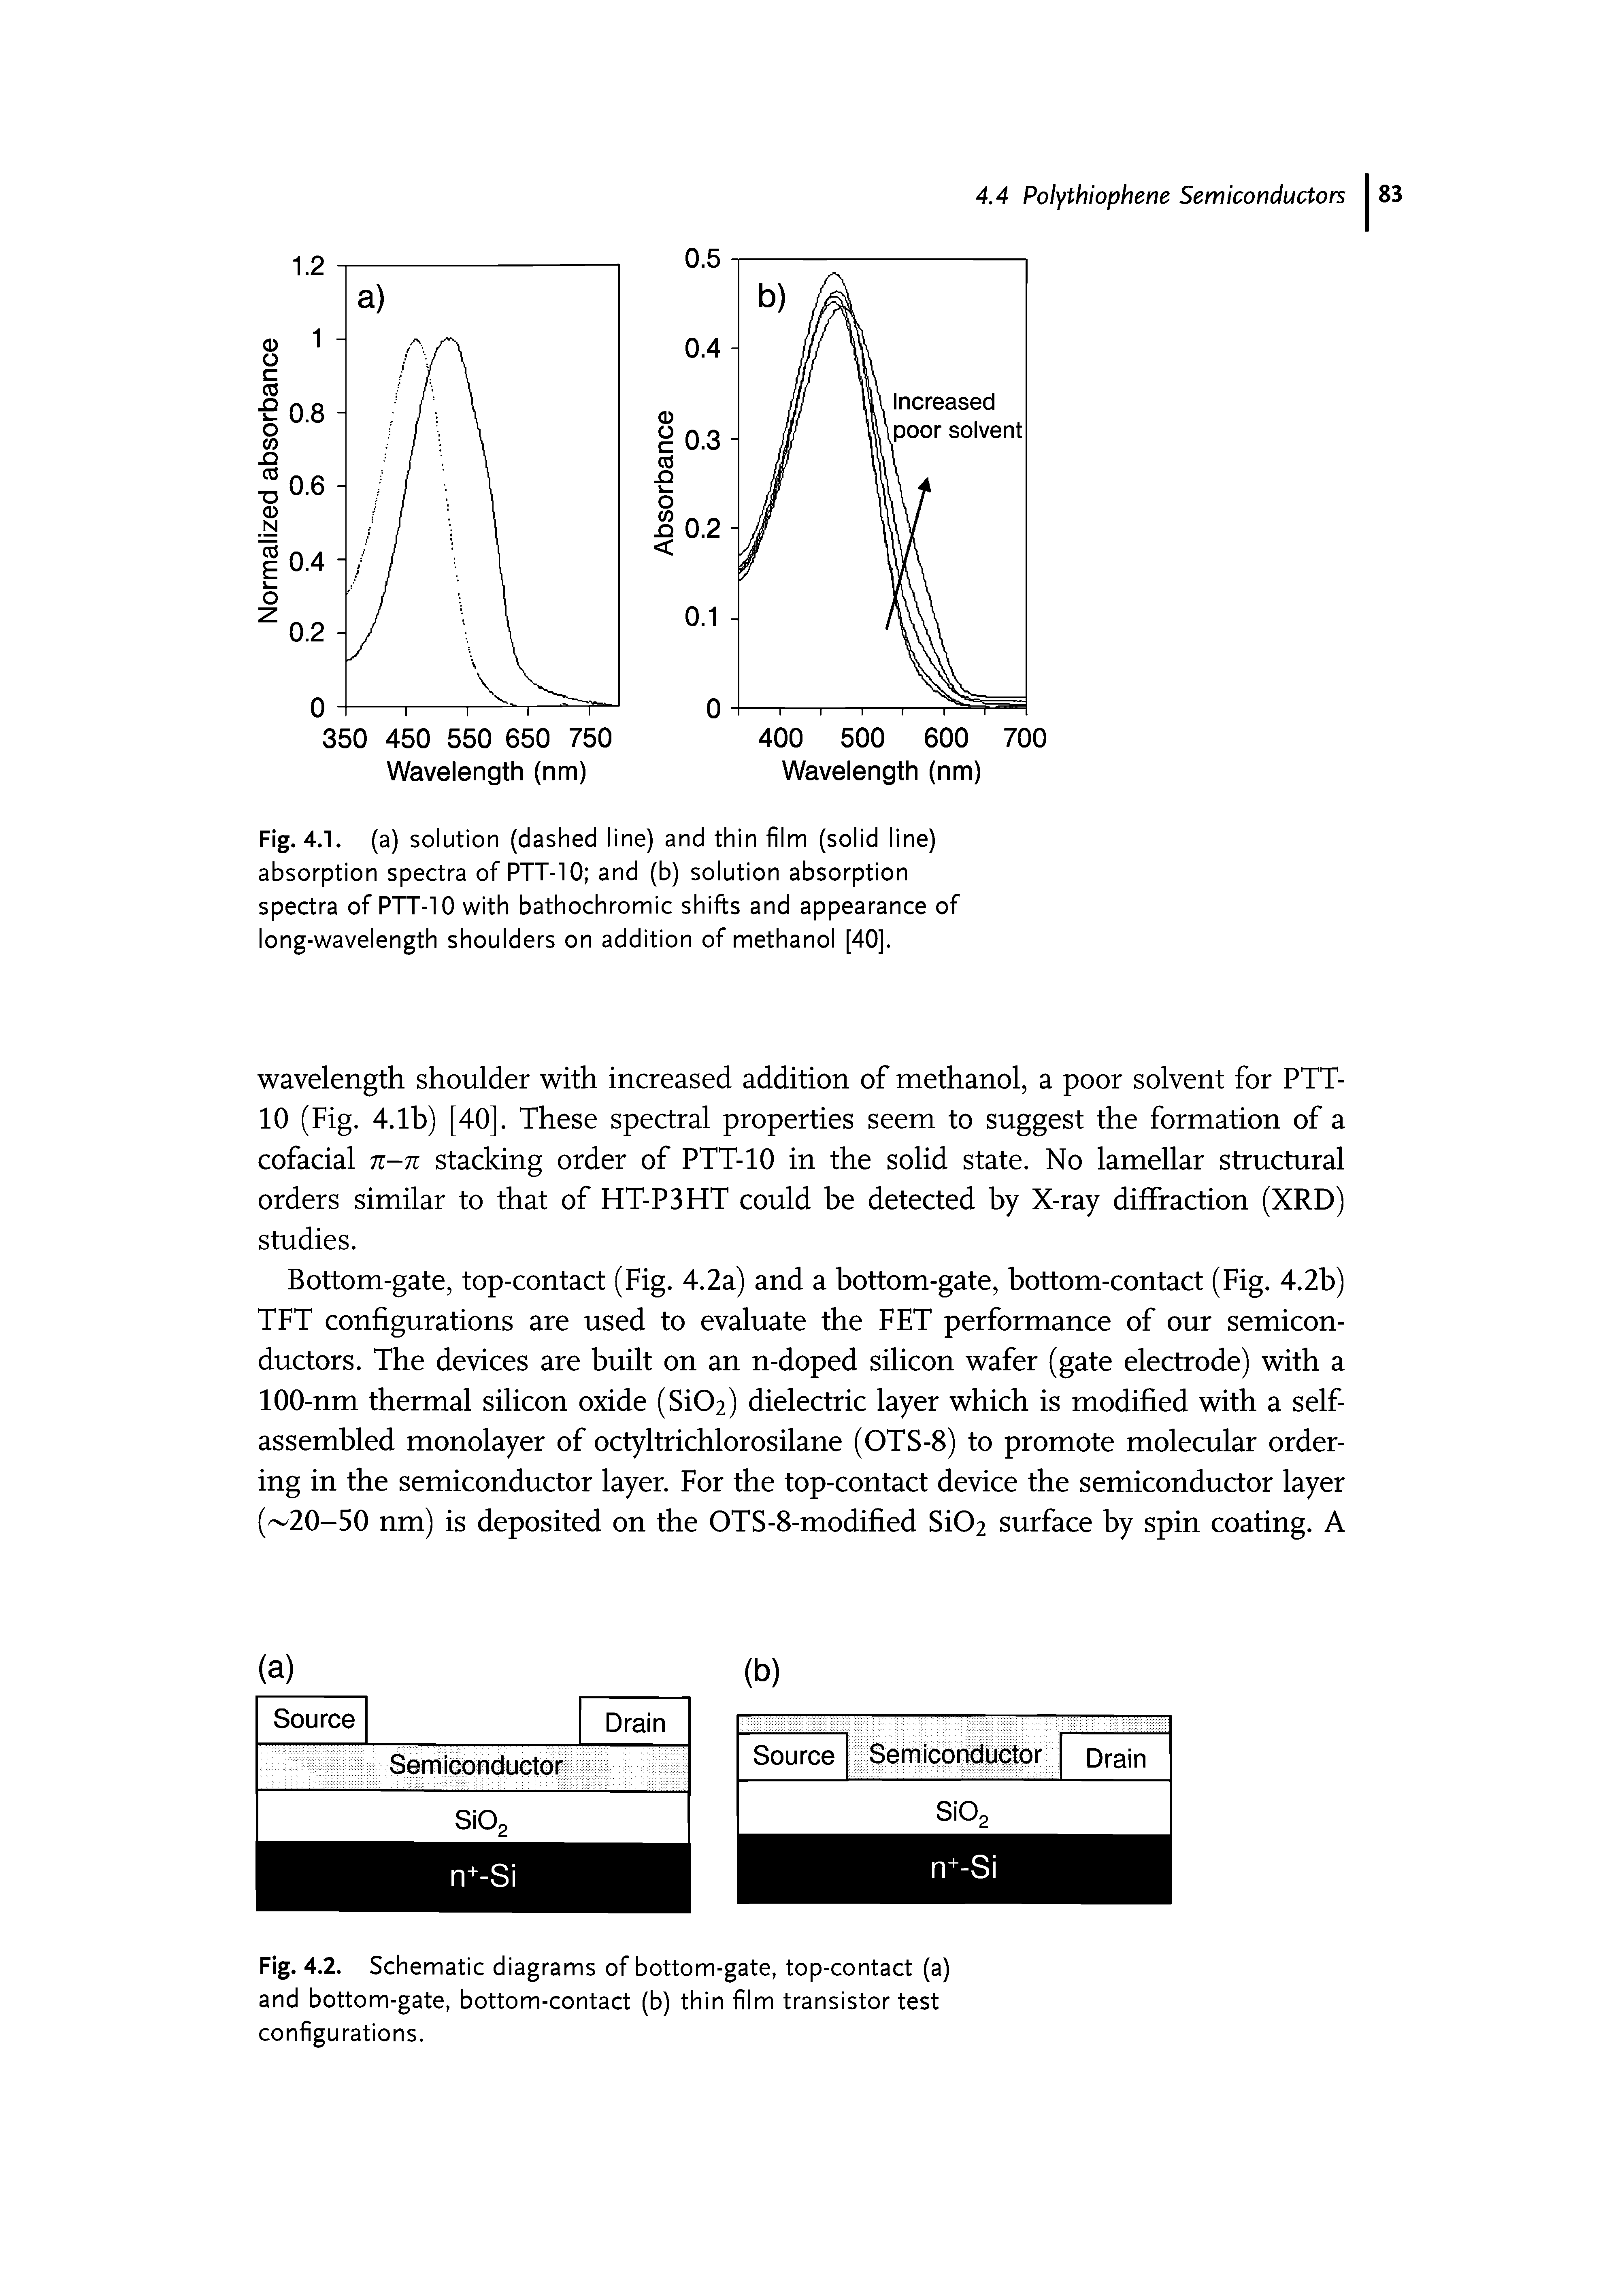 Fig. 4.2. Schematic diagrams of bottom-gate, top-contact (a) and bottom-gate, bottom-contact (b) thin film transistor test configurations.